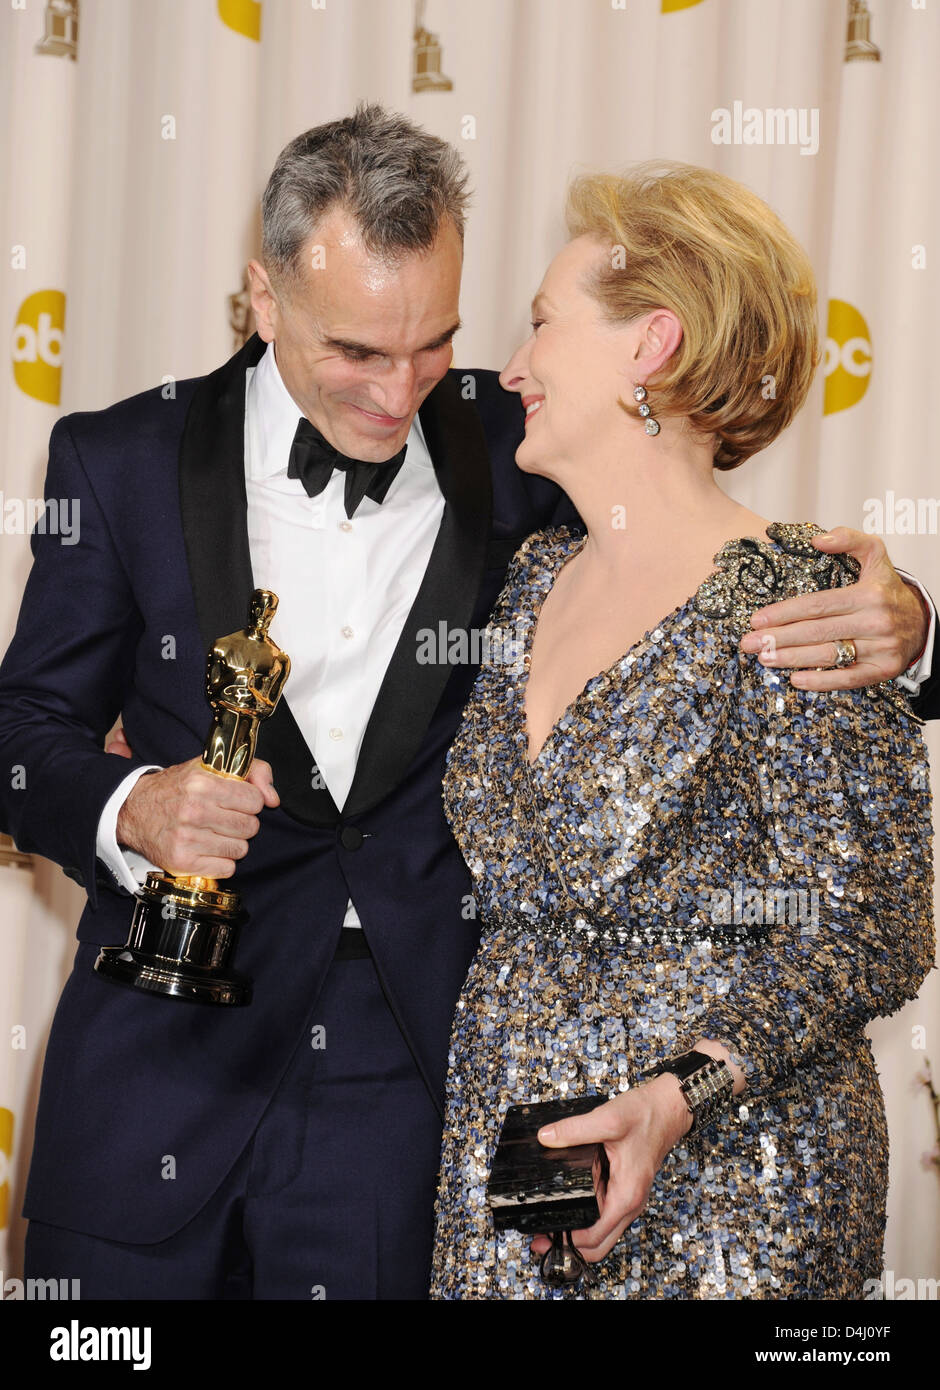 DANIEL DAY-LEWIS holding his Oscar and Meryl Streep at 85th Academy Awards in Los Angeles in February 2013. Photo Jeffrey Mayer Stock Photo